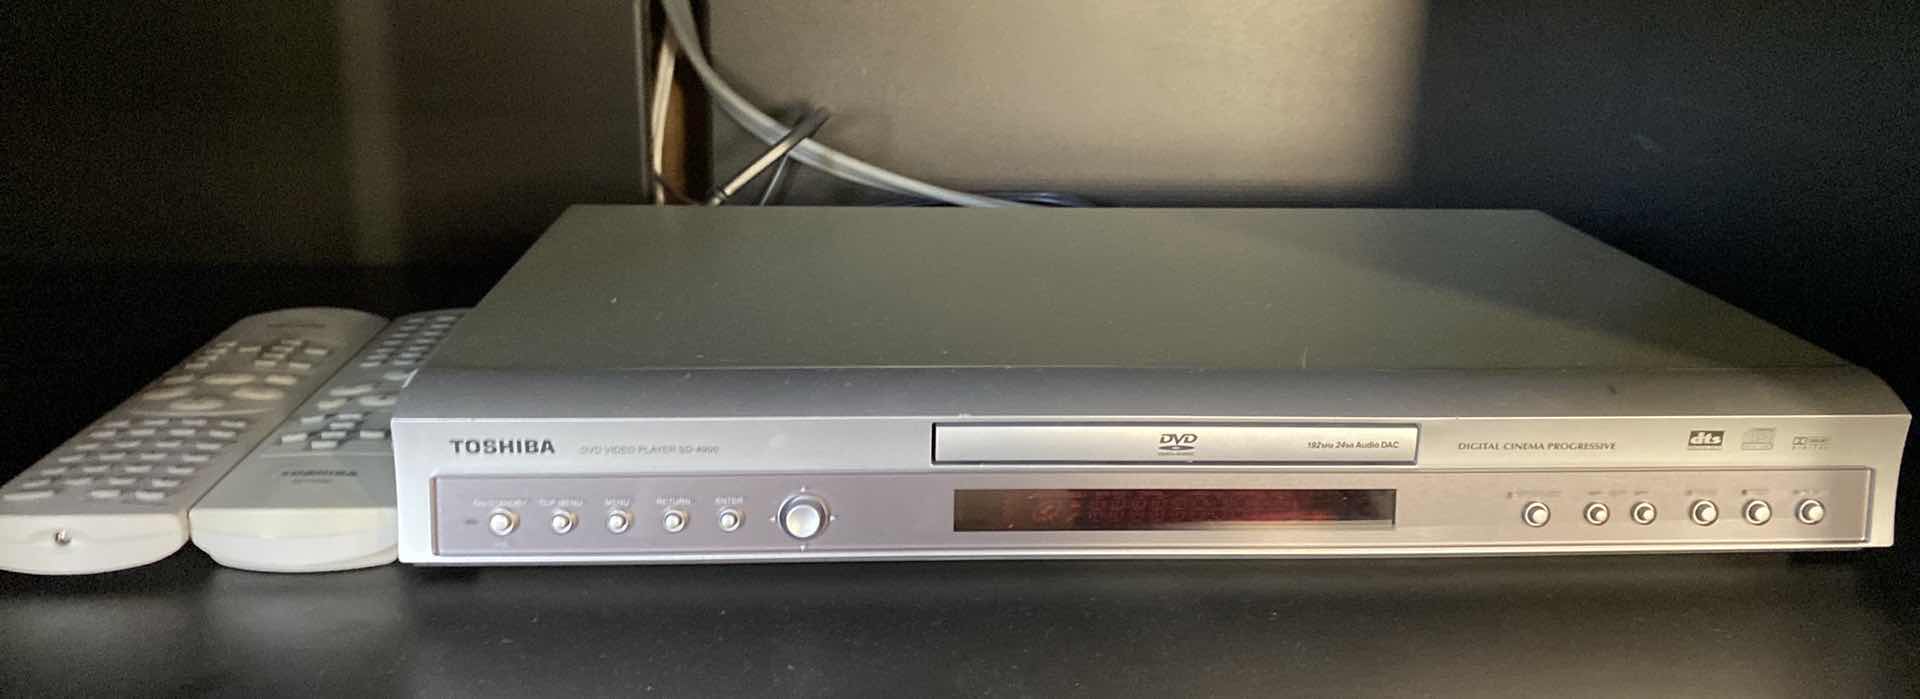 Photo 1 of TOSHIBA DVD PLAYER WITH REMOTE